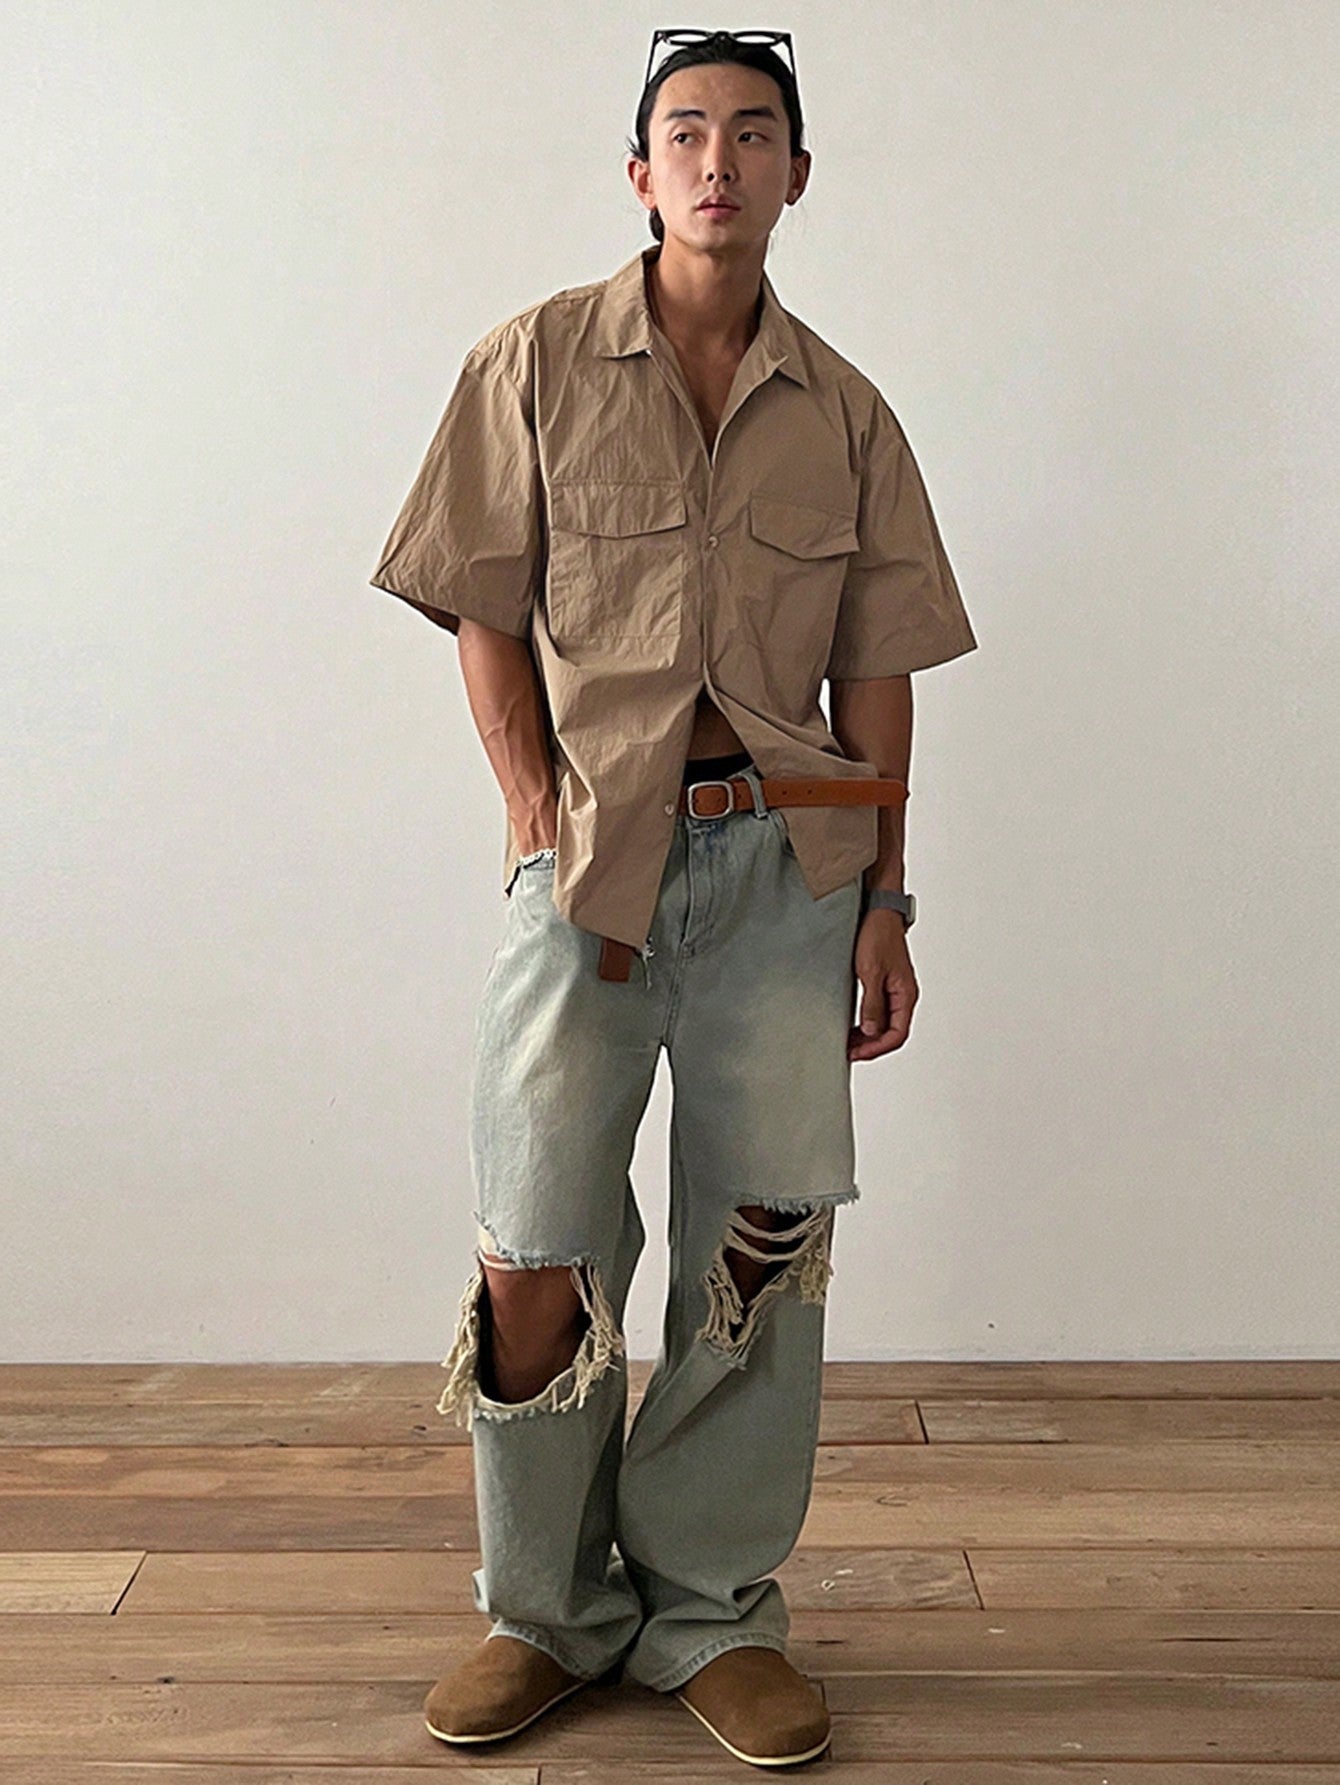 Men's Solid Color Short Sleeve Cargo Shirt With Pockets For Summer